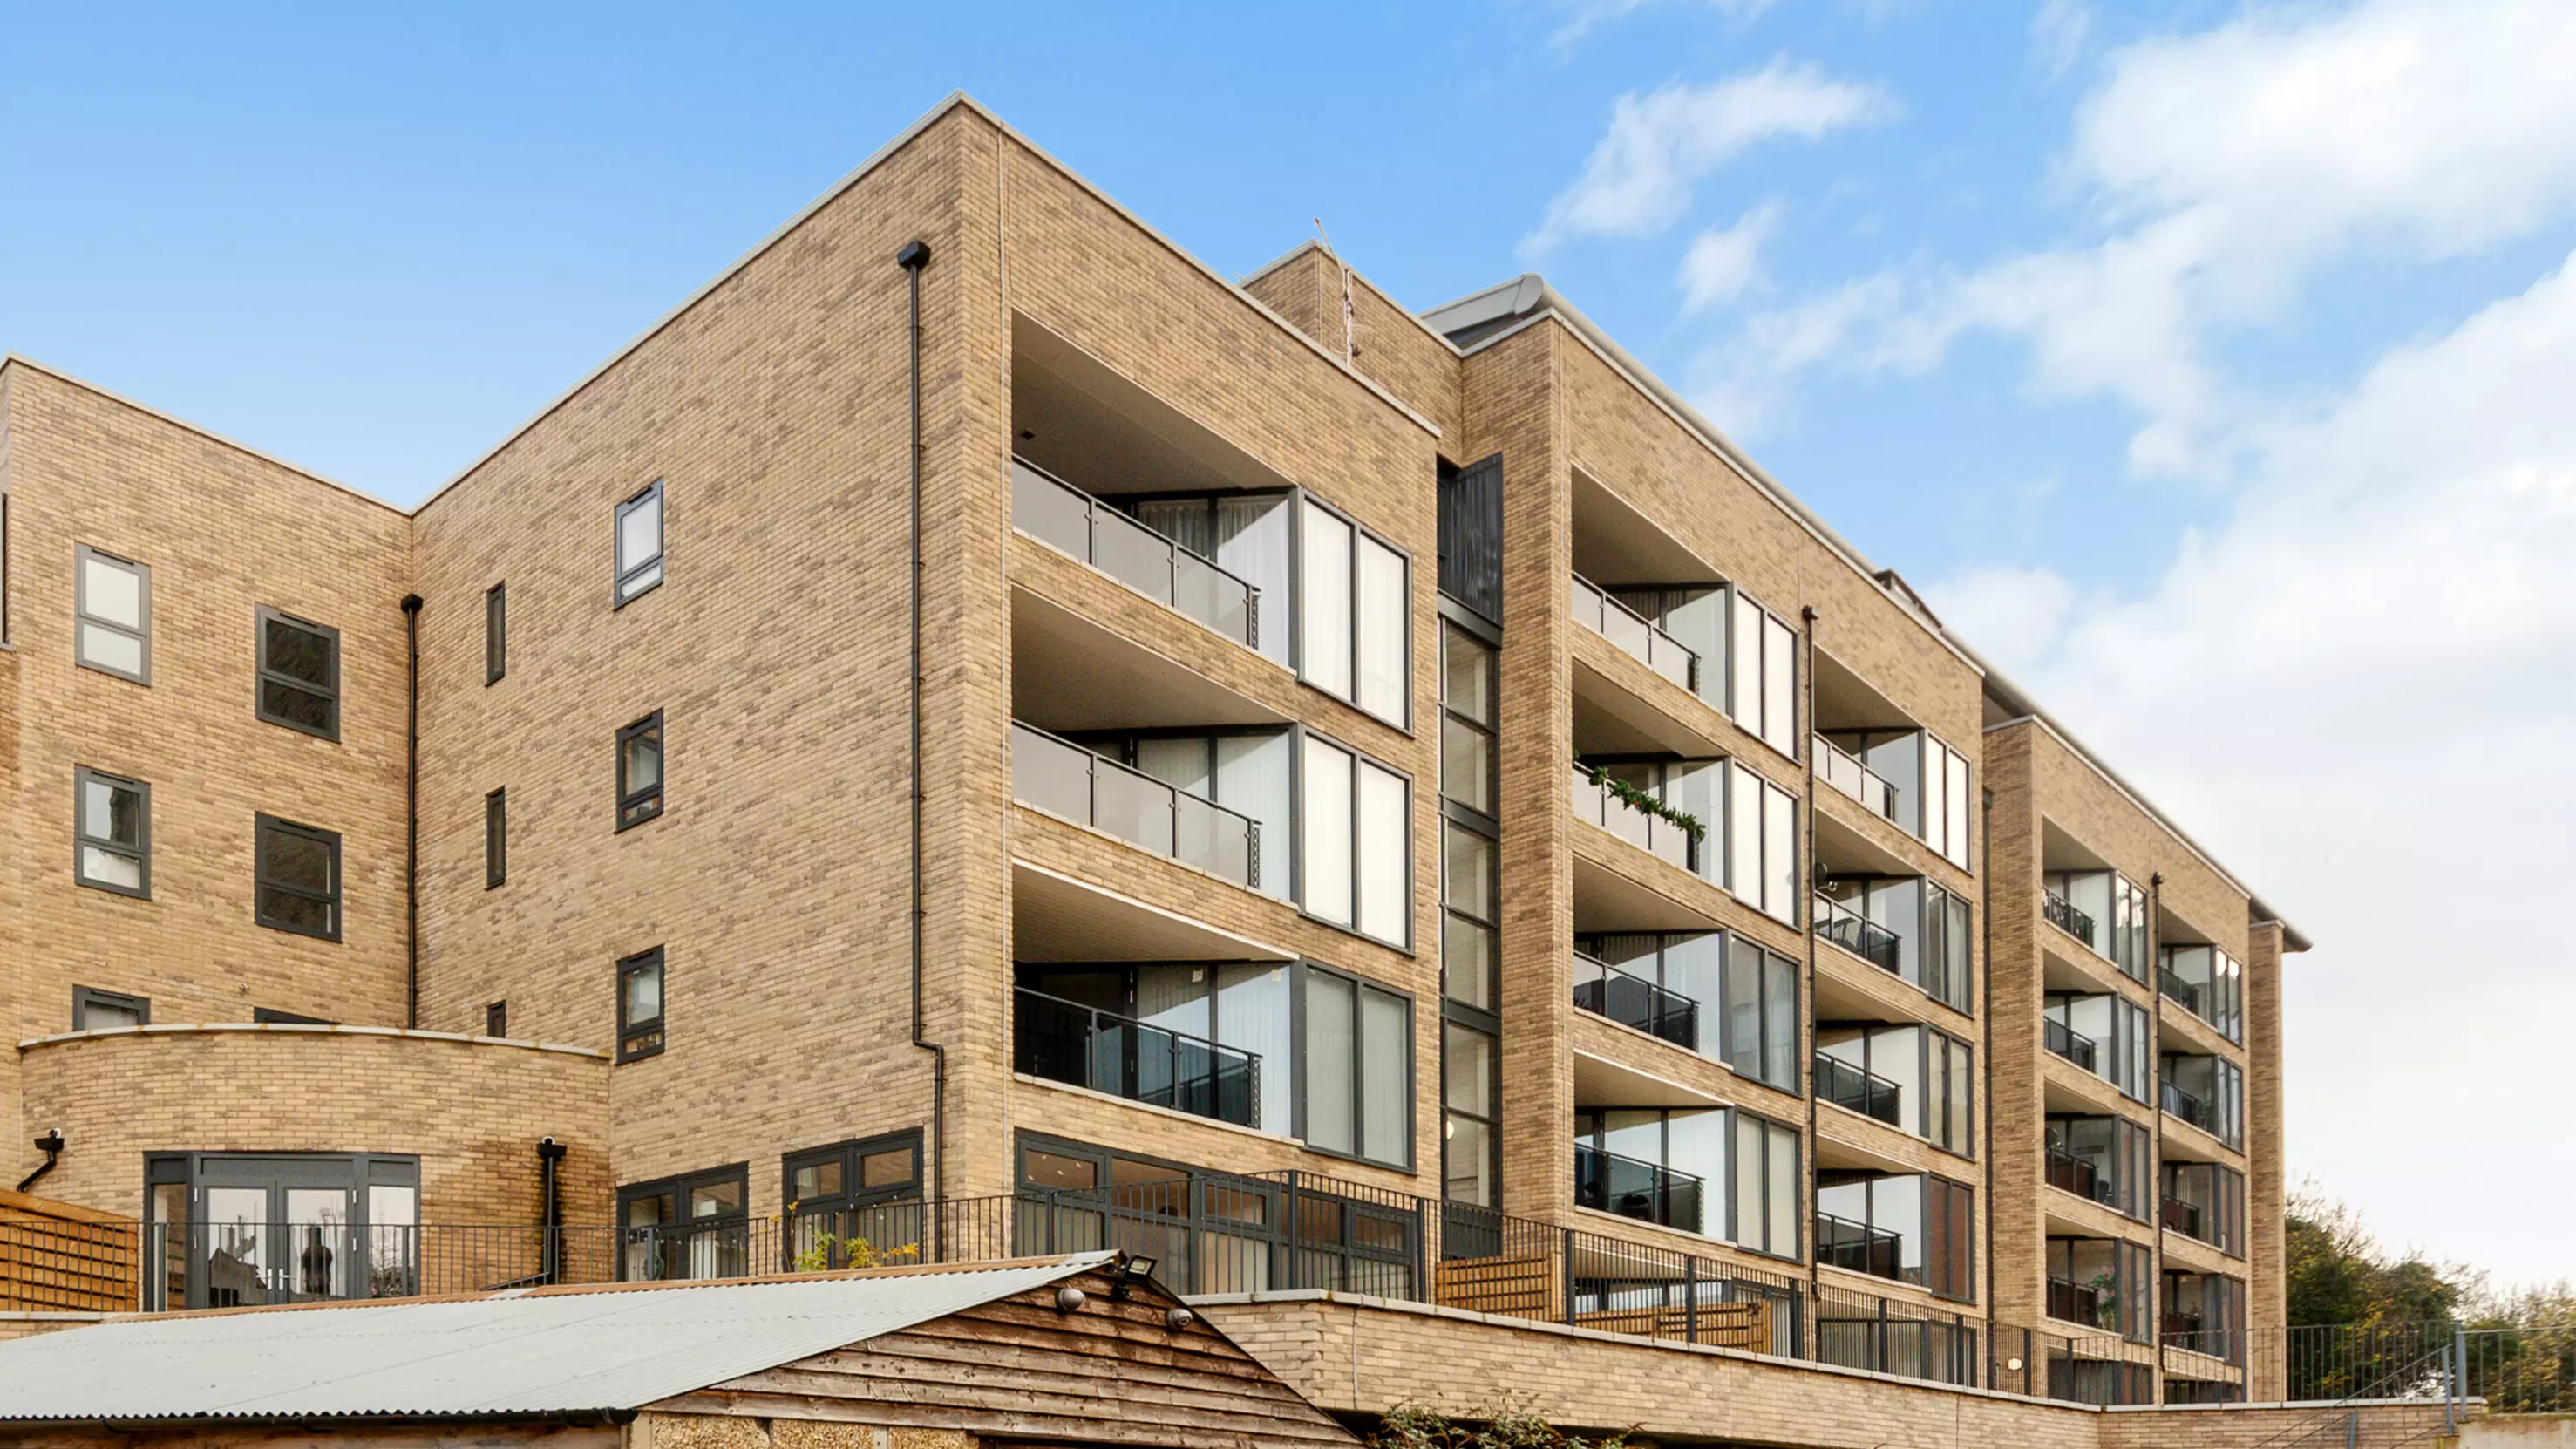 Brothers Raffle Two-Bedroom Luxury Apartment For Just £2